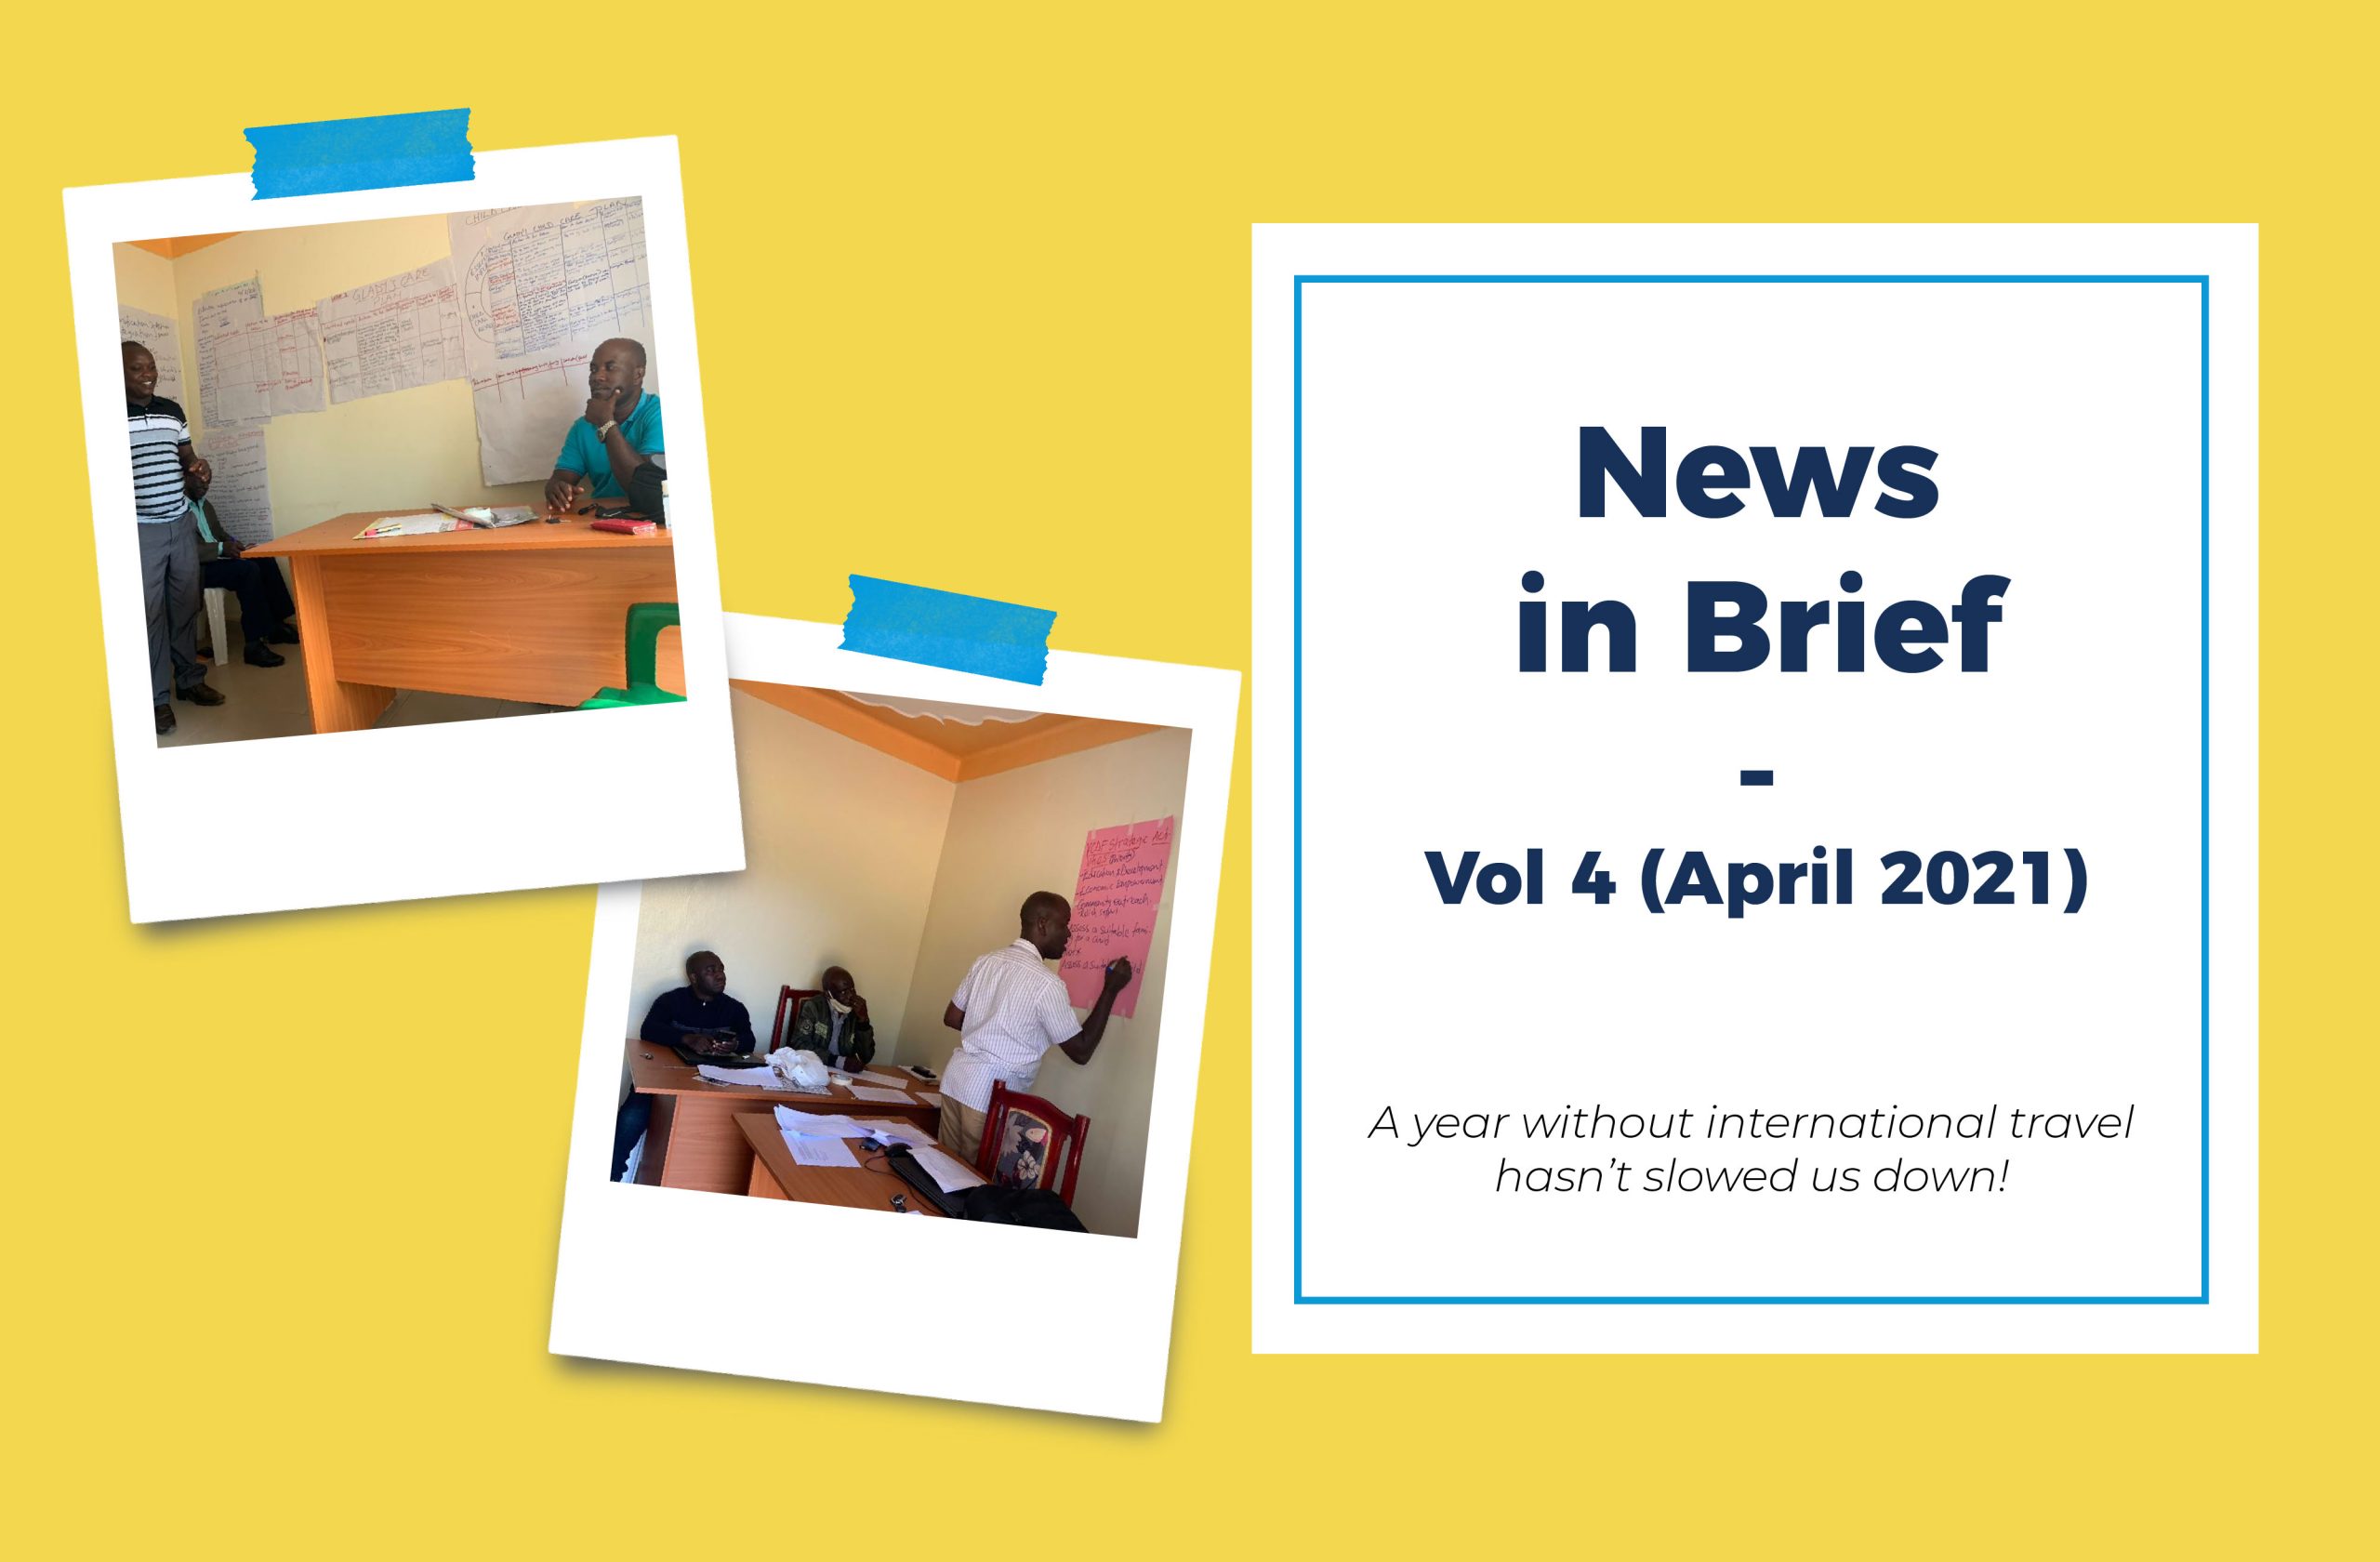 Image Text: News in Brief - Vol 4 (April 2021) A year without international travel hasn't slowed us down! On the left are two polaroids of Ugandan men in a classroom environment surrounded by large pages of handwritten notes stuck to the walls